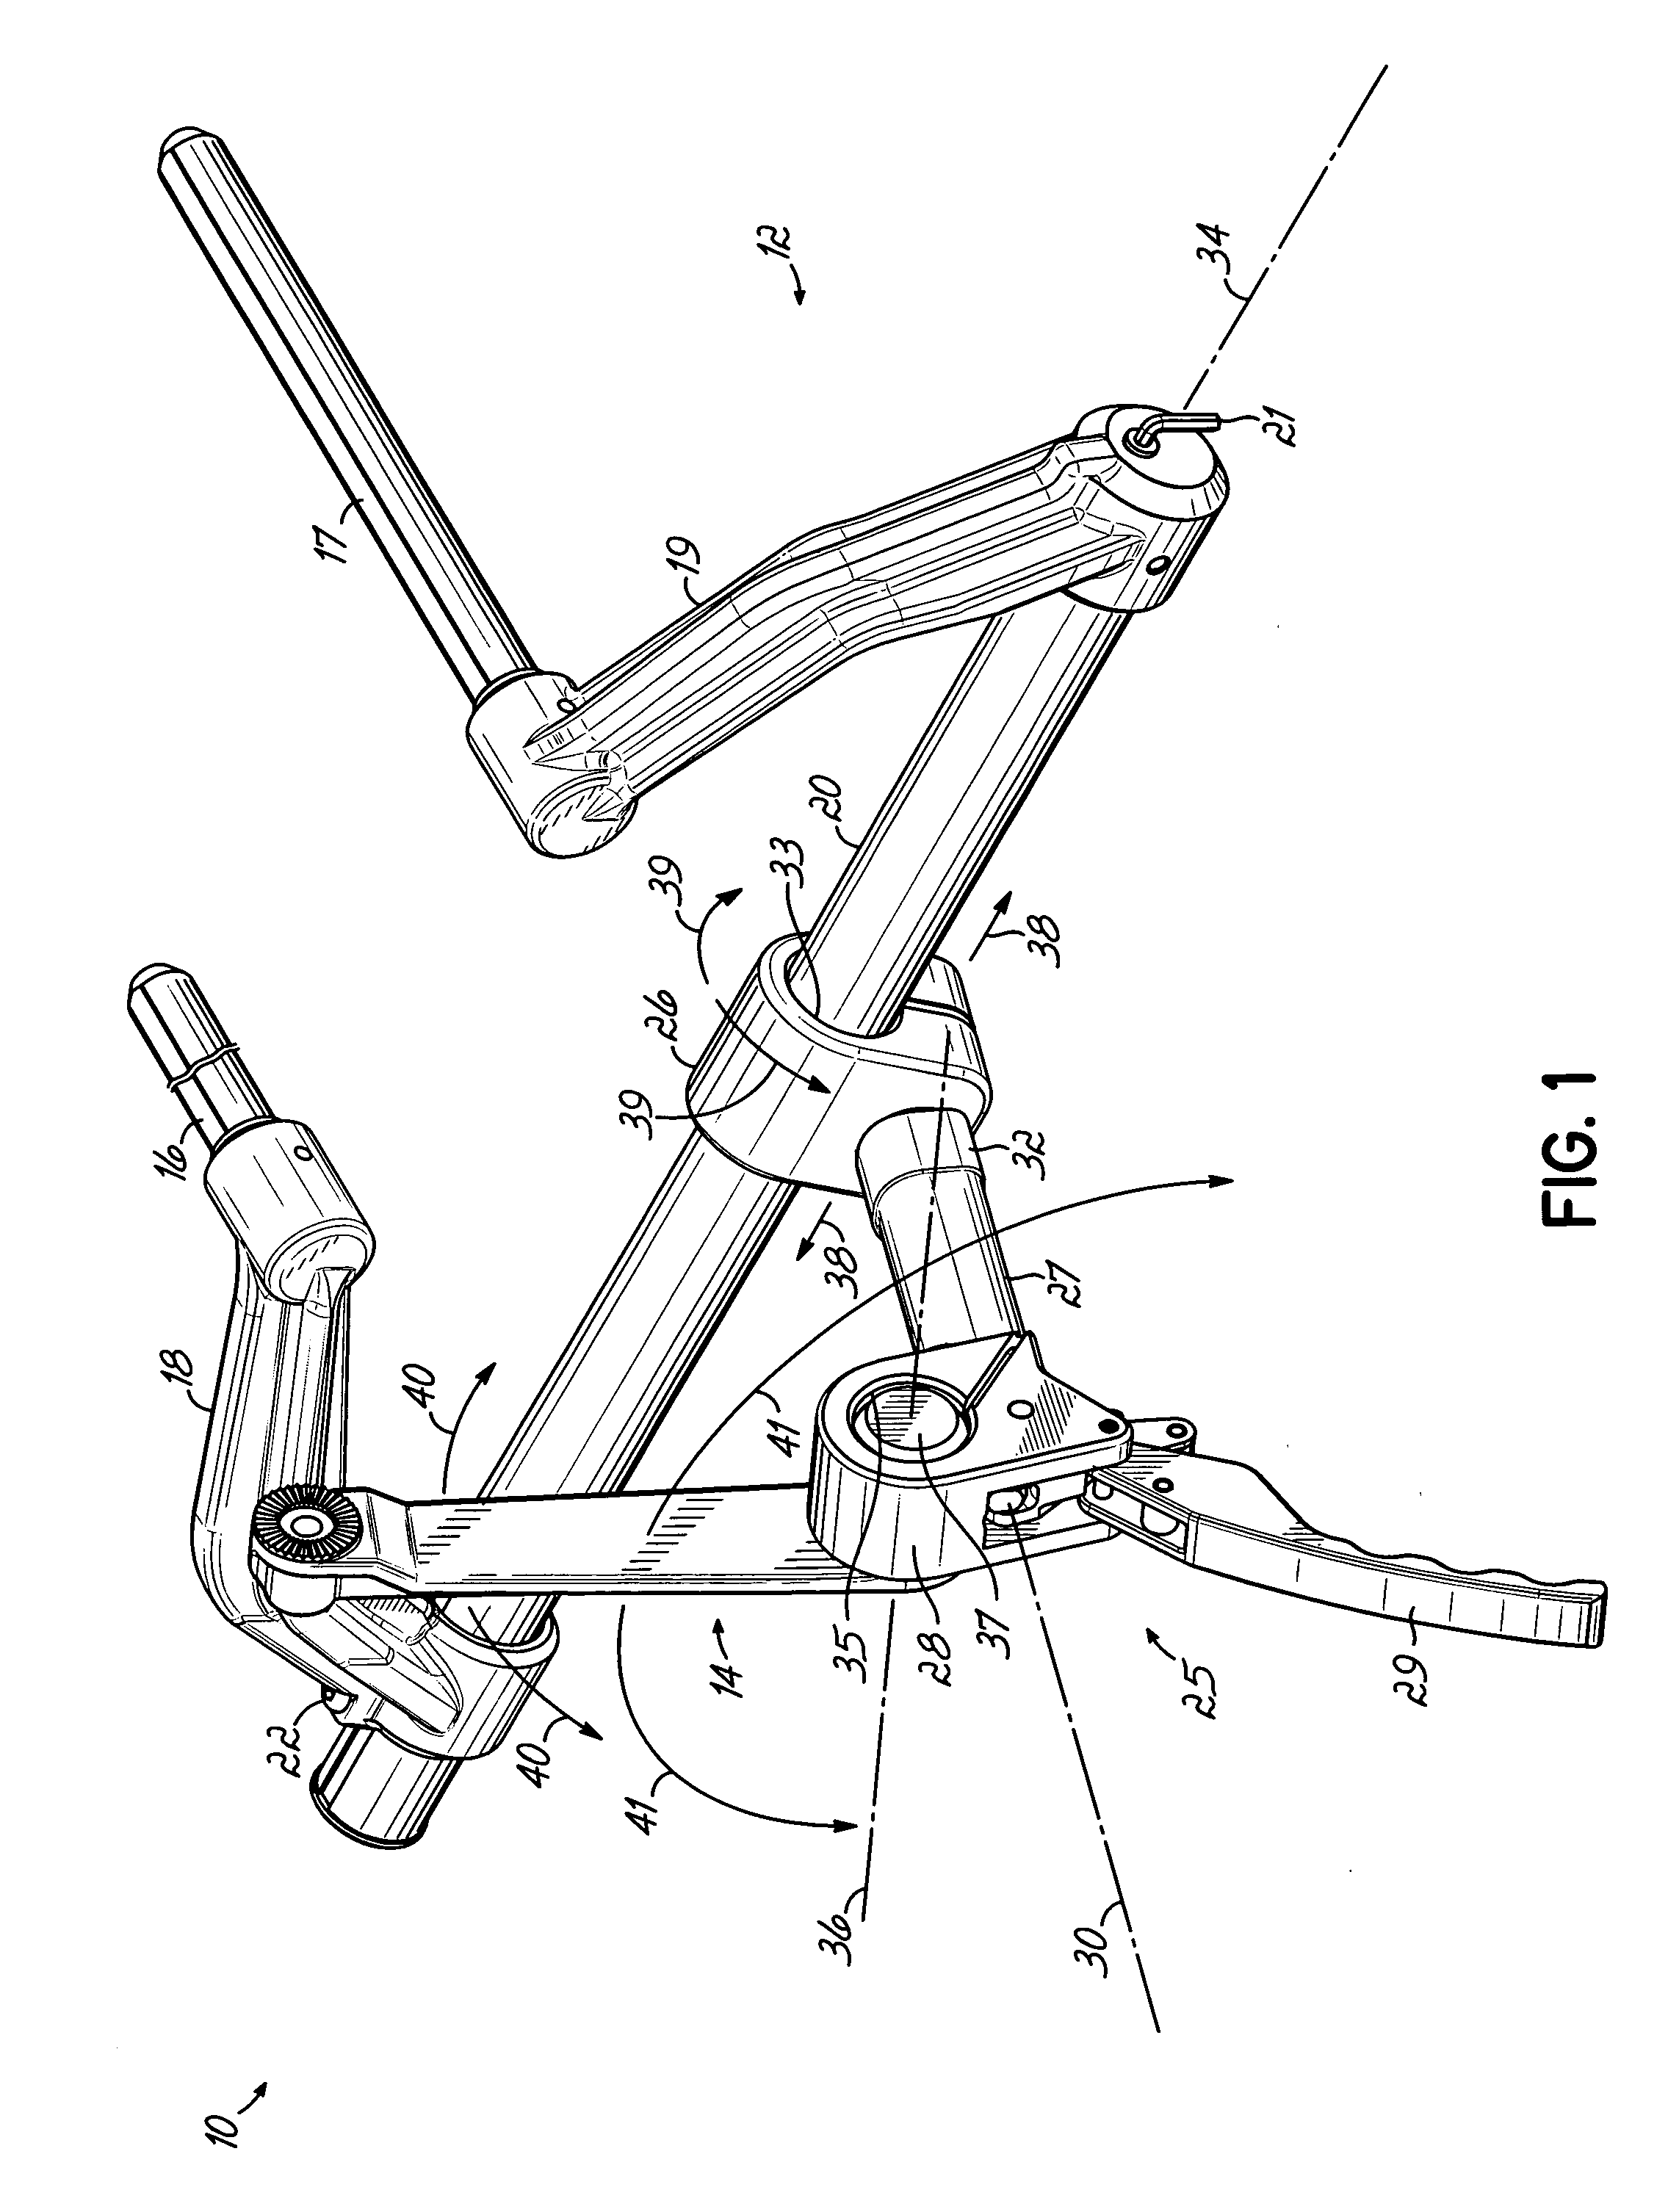 Head support base unit with multi-directional capability